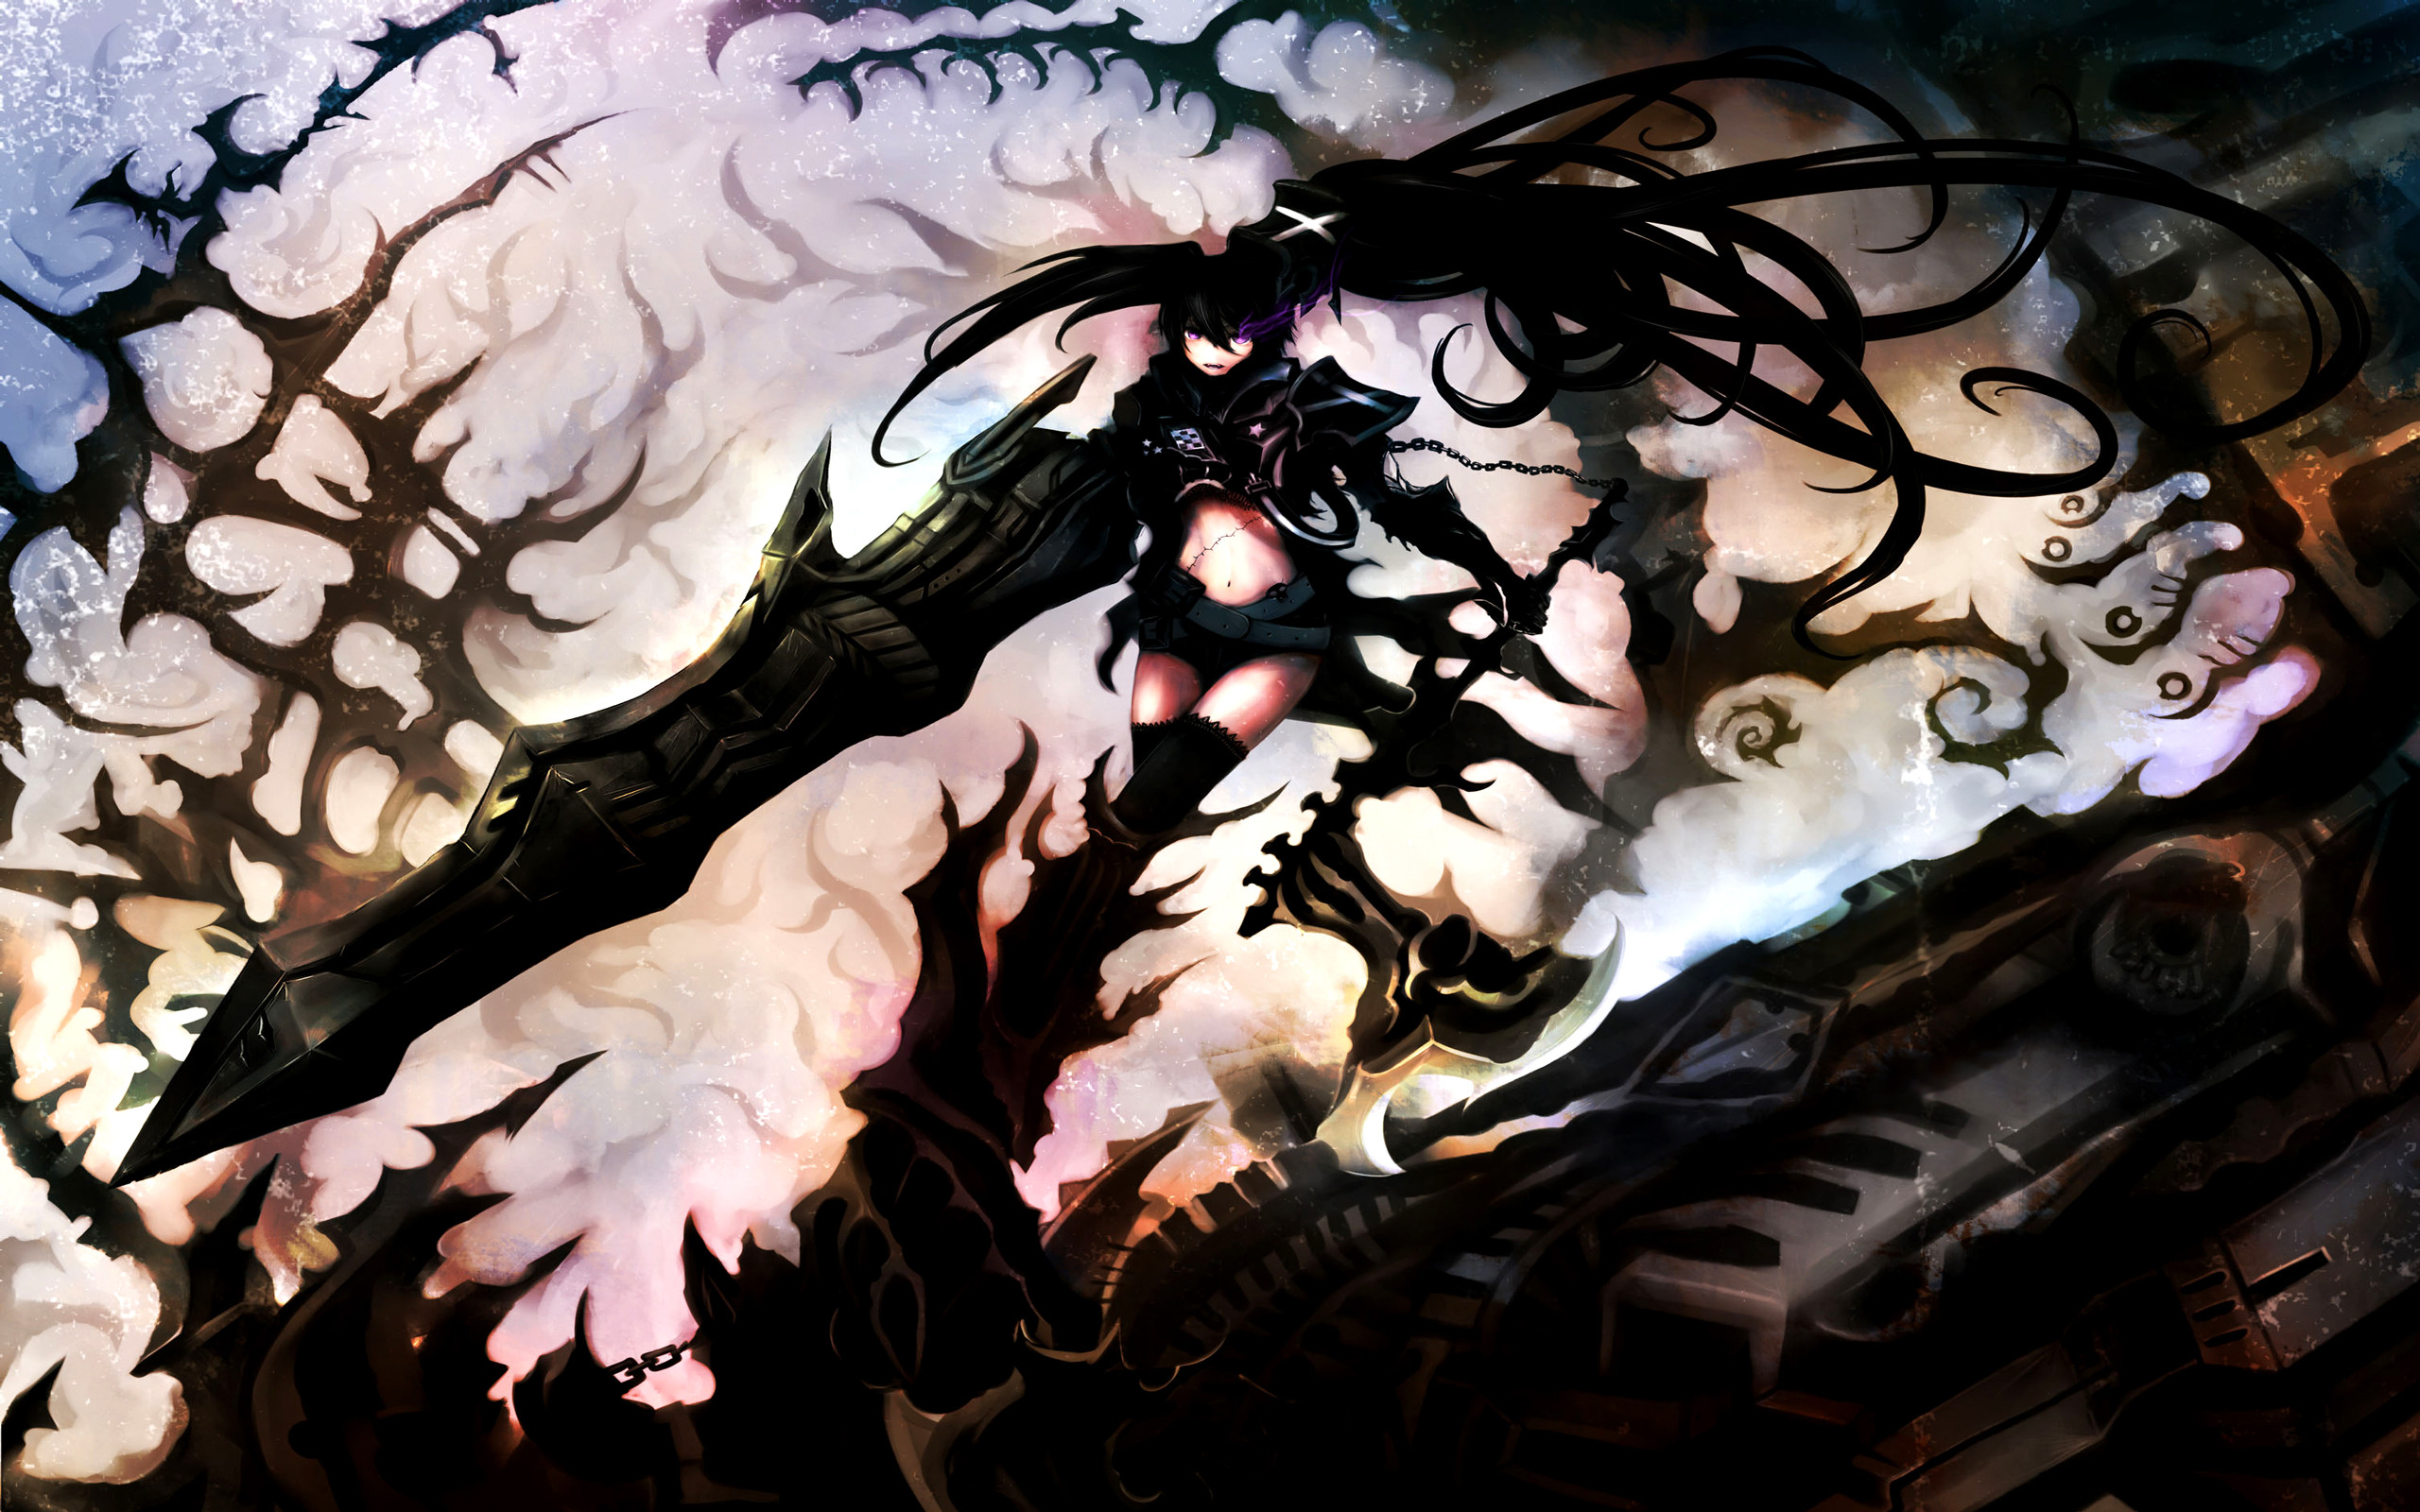 2560x1600 76 Insane Black Rock Shooter HD Wallpapers | Backgrounds - Wallpaper Abyss